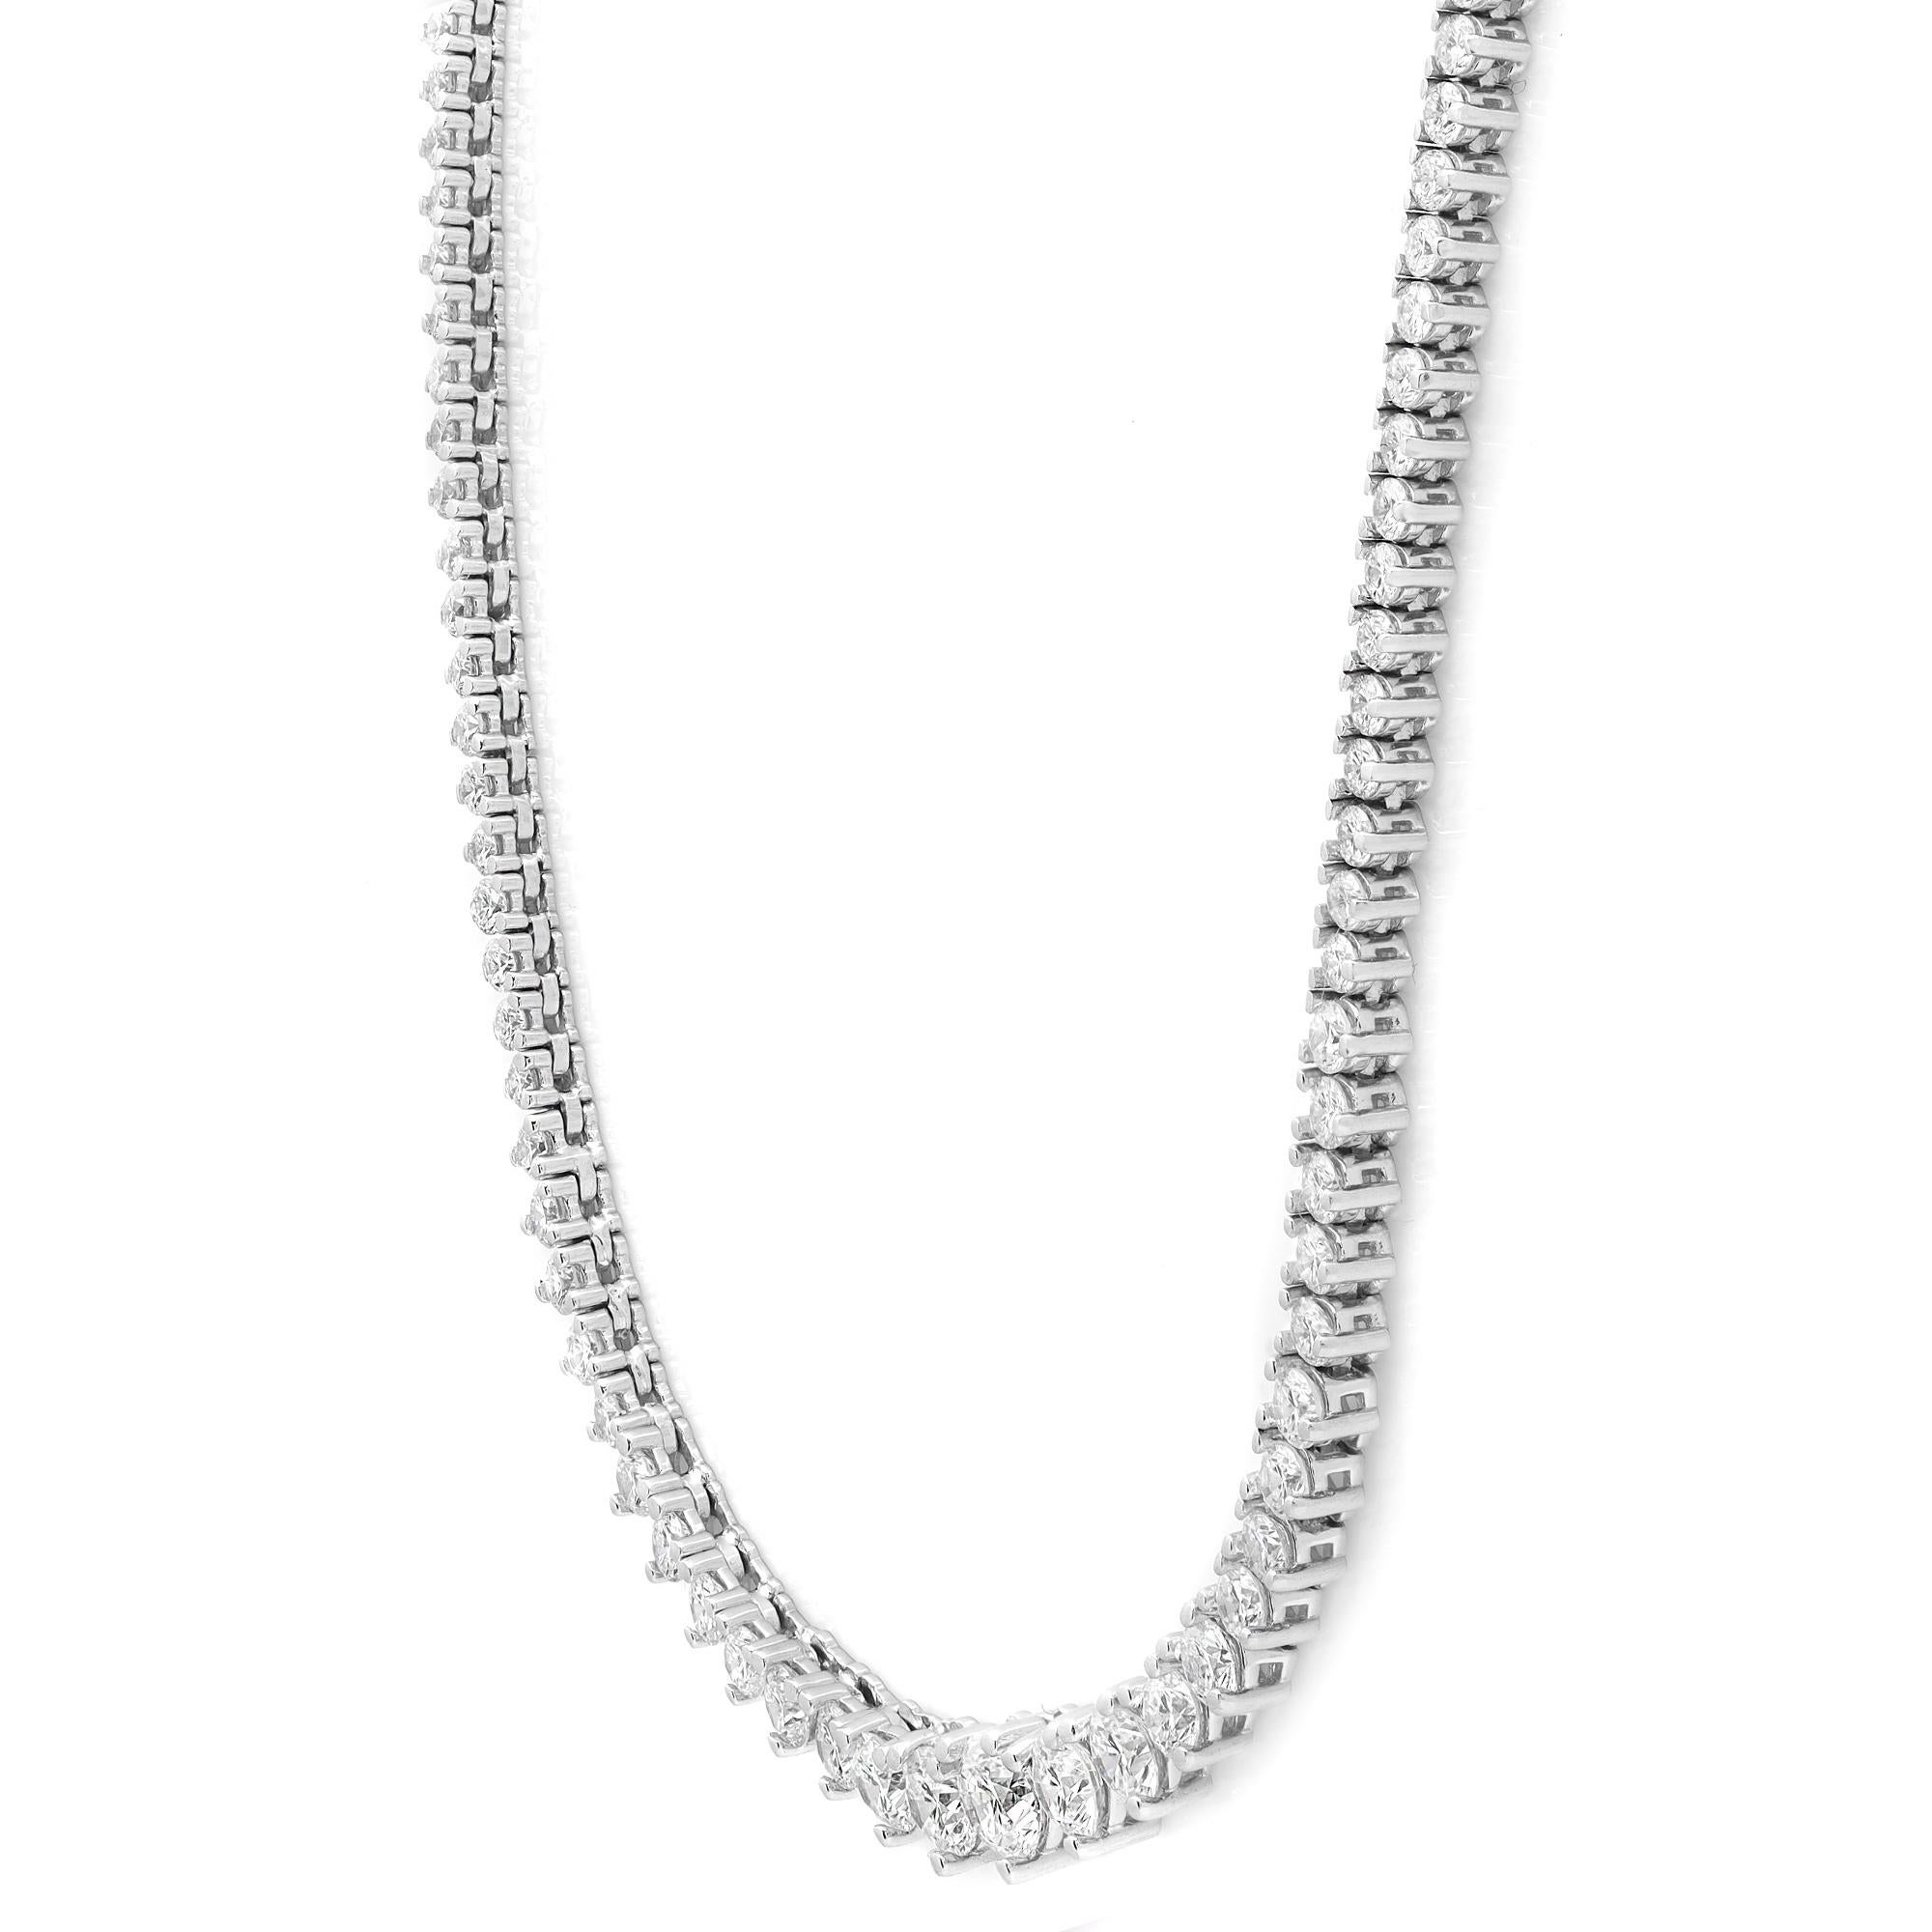 This stylish tennis necklace features glistening graduating round cut diamonds that sparkle brightly for a glamorous and charming look. This piece is set with round cut diamonds weighing 6.00 carats. Diamond quality: G-H color and VS-SI clarity.